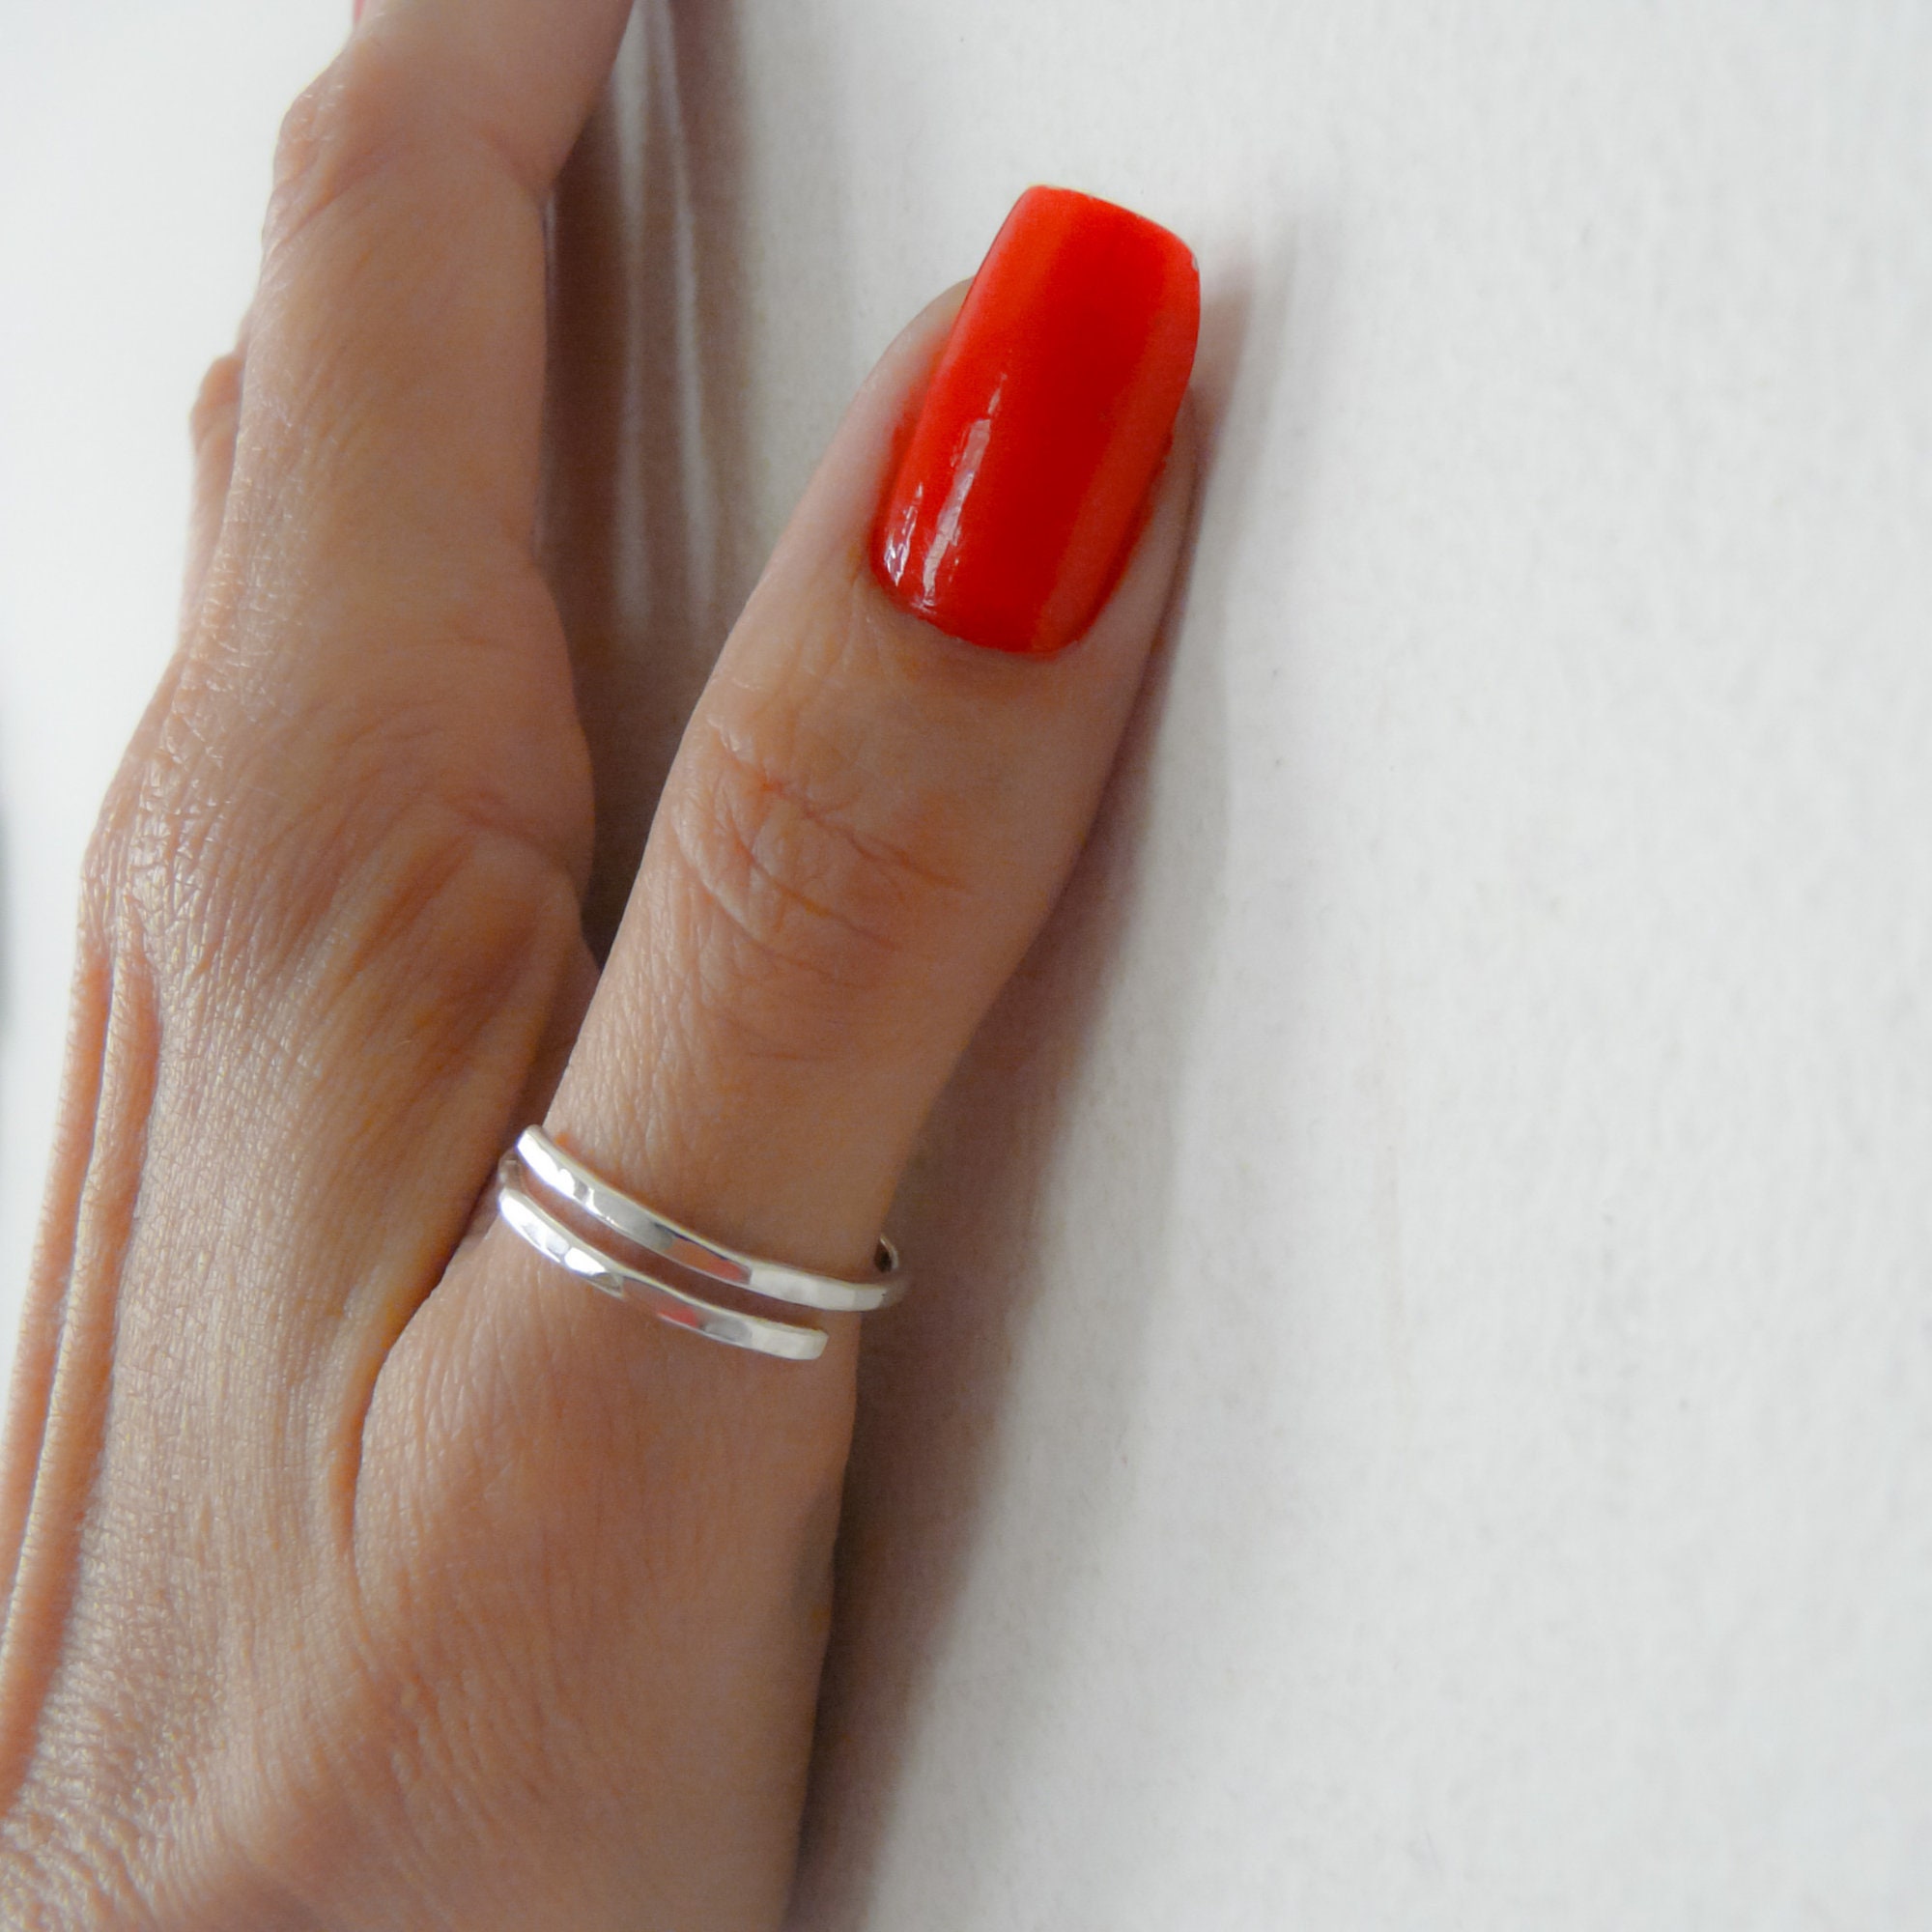 Feng Shui Ring: Meaning, Benefits, How to Wear, and Rules